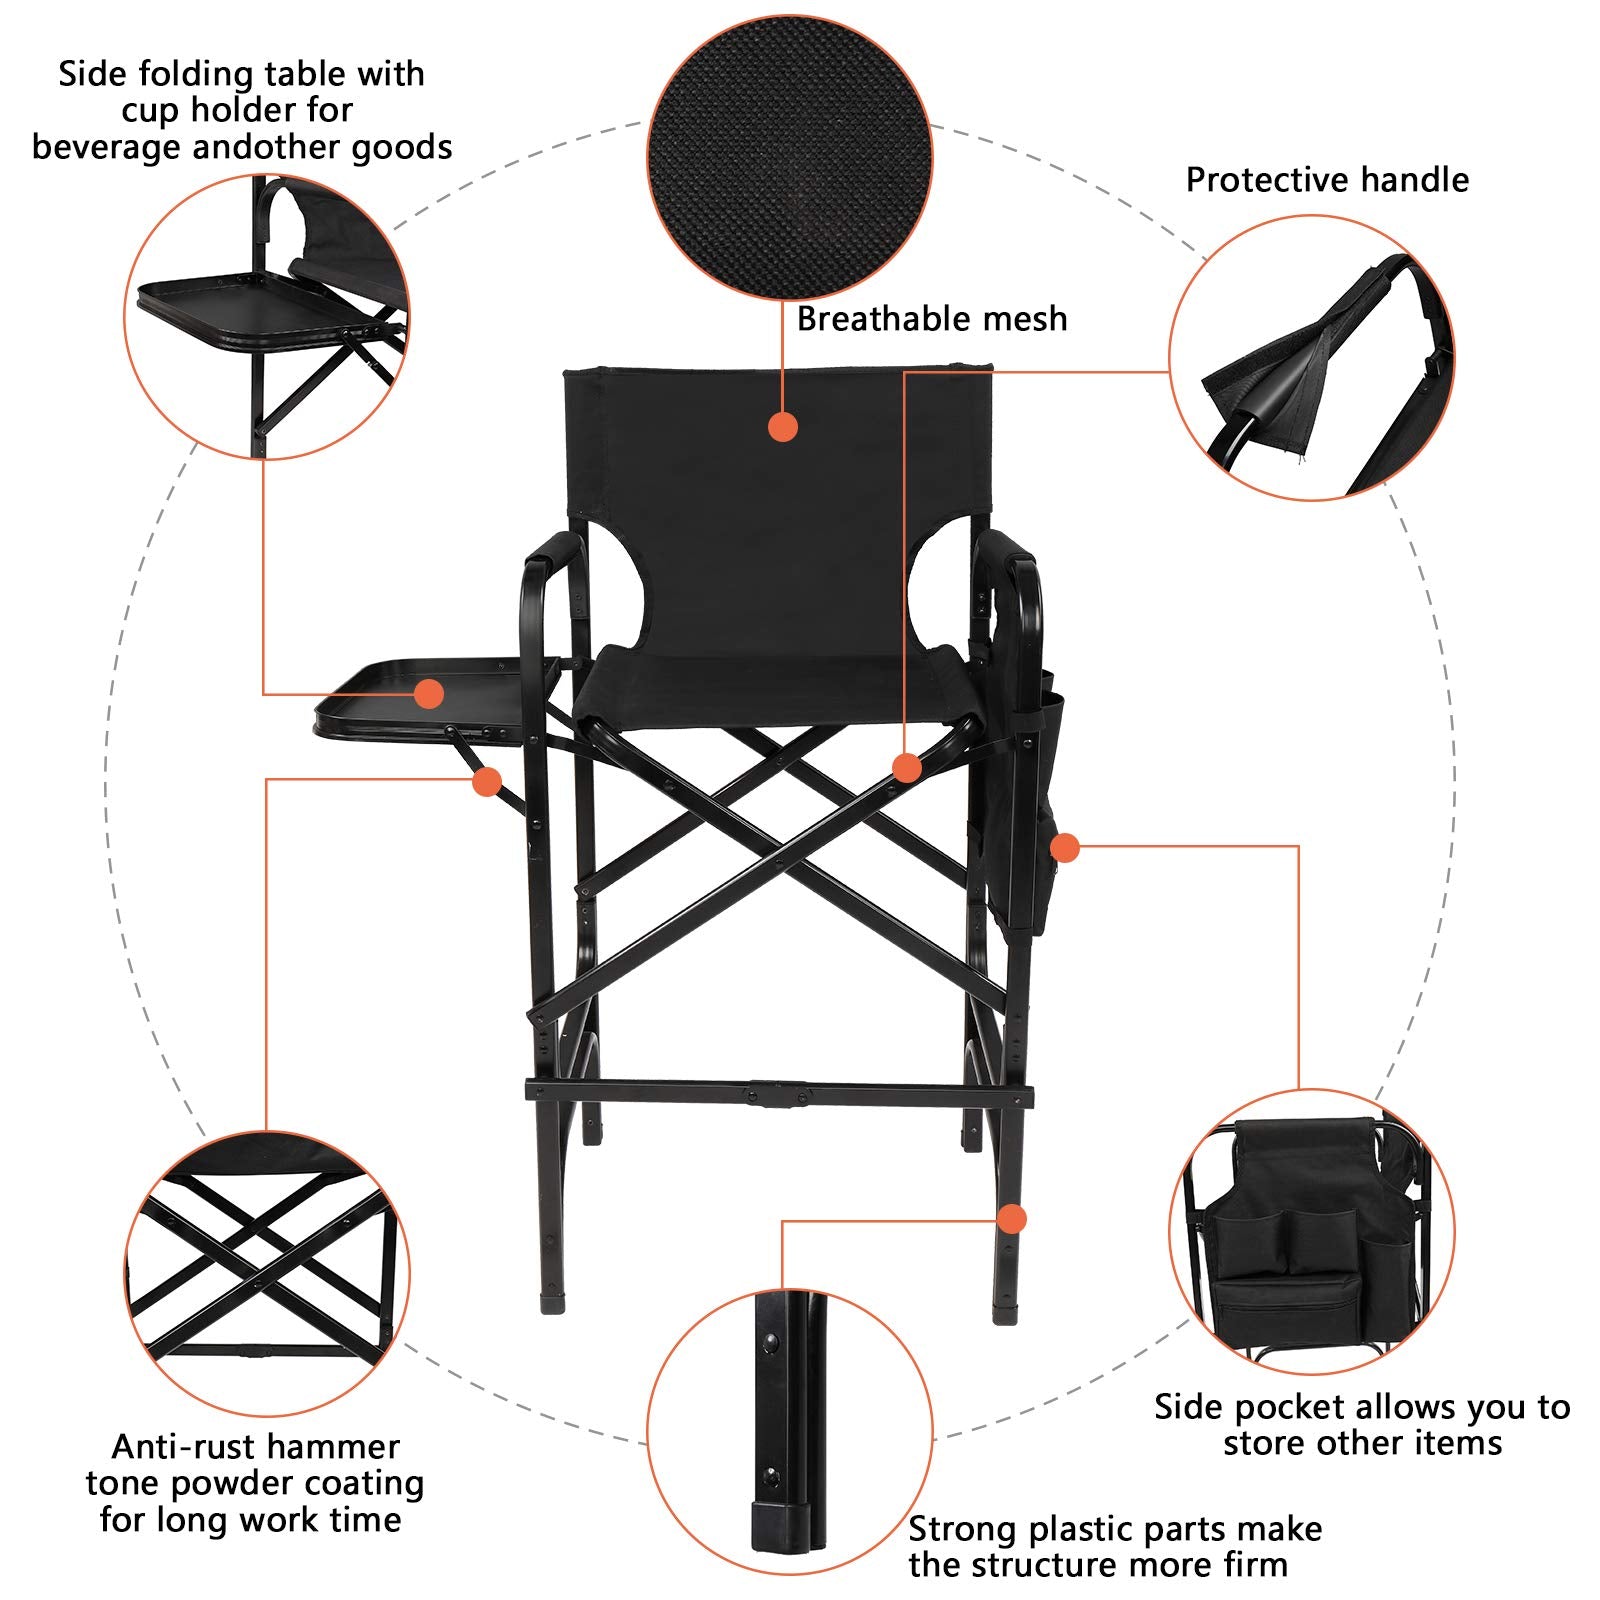 Omysalon 30in Folding Directors Chair 300 lbs with Collapsible Side Table Black